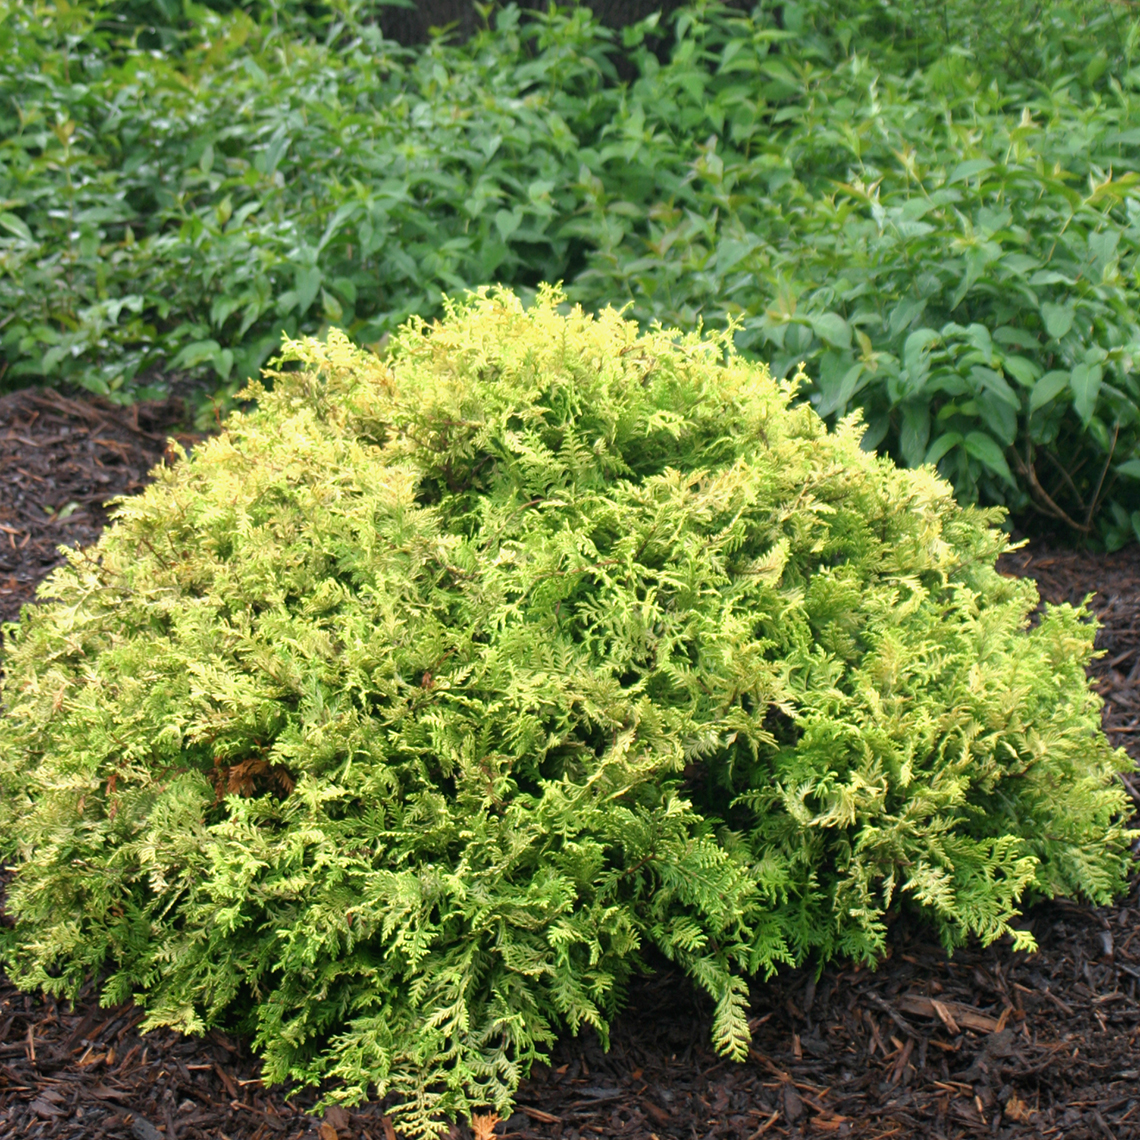 Tiny mound of Chamaecyparis Vintage Gold in bed of mulch